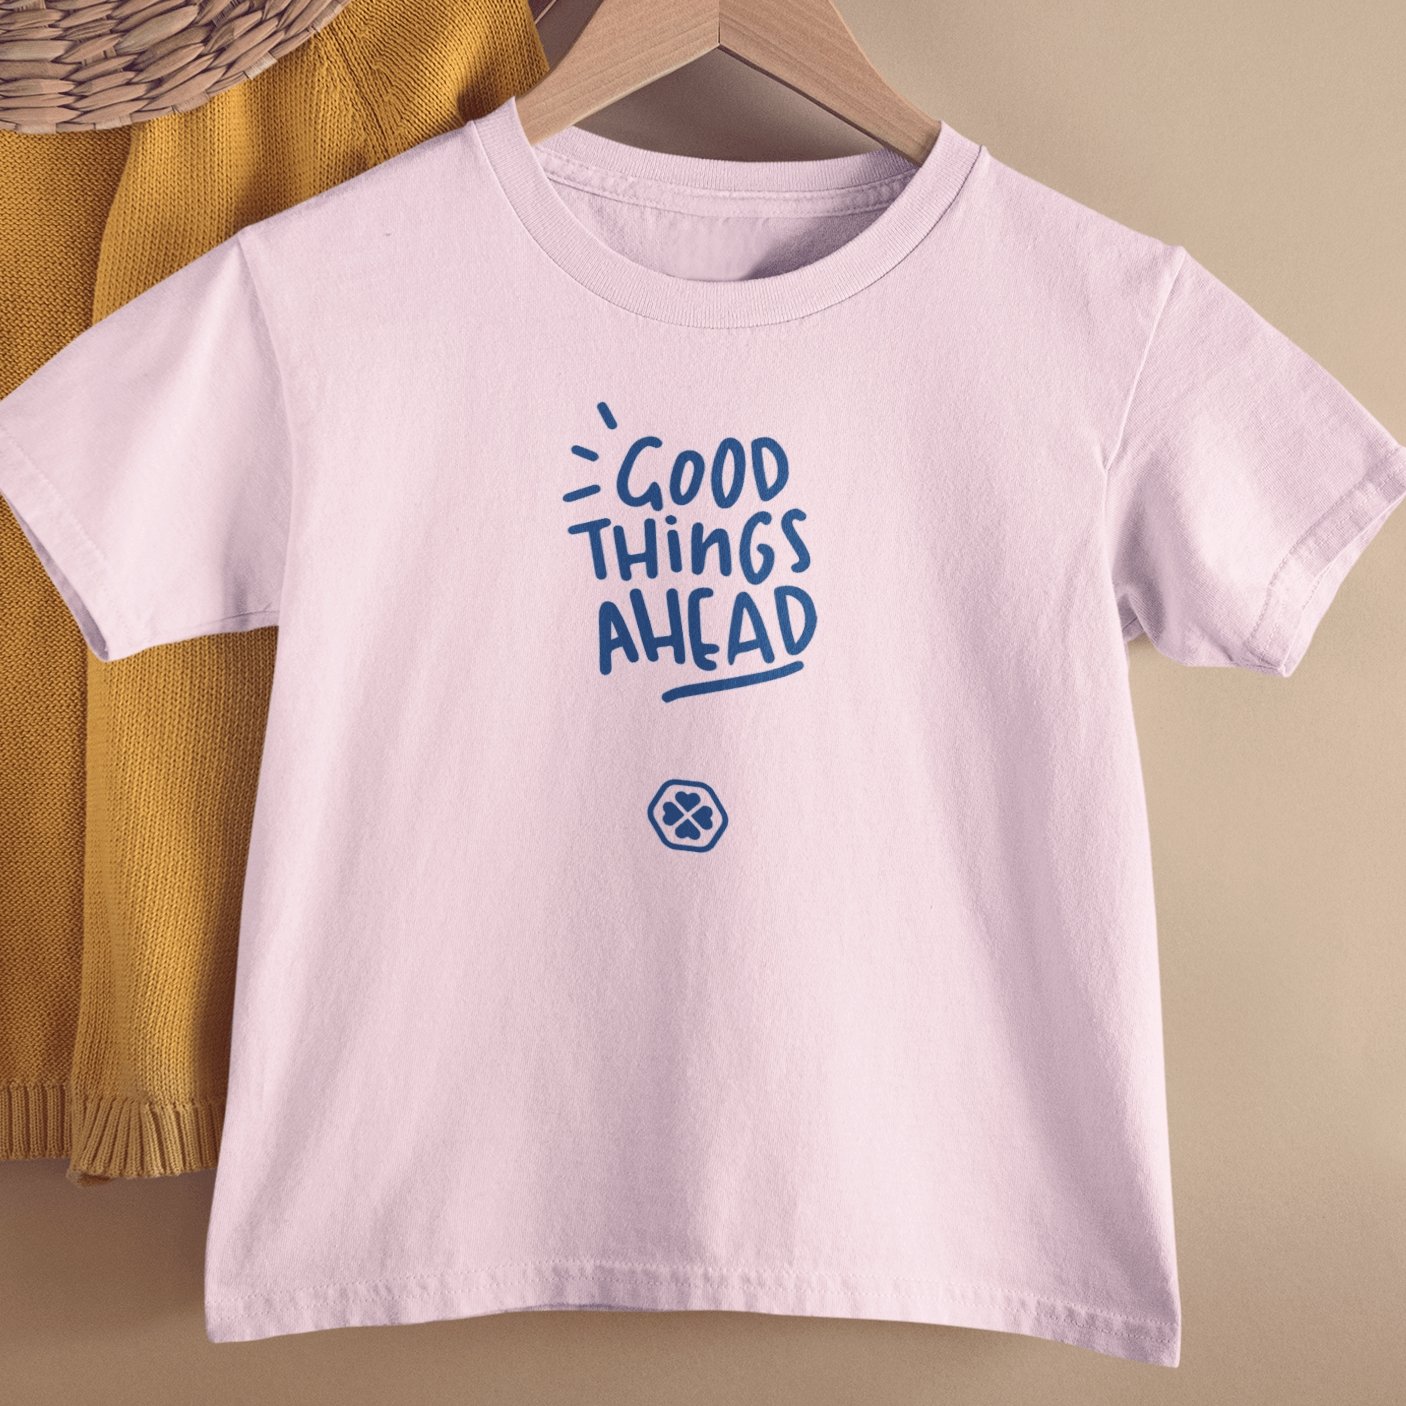 Good Things Ahead Kid's Fine Jersey T-shirt - Gladly Family